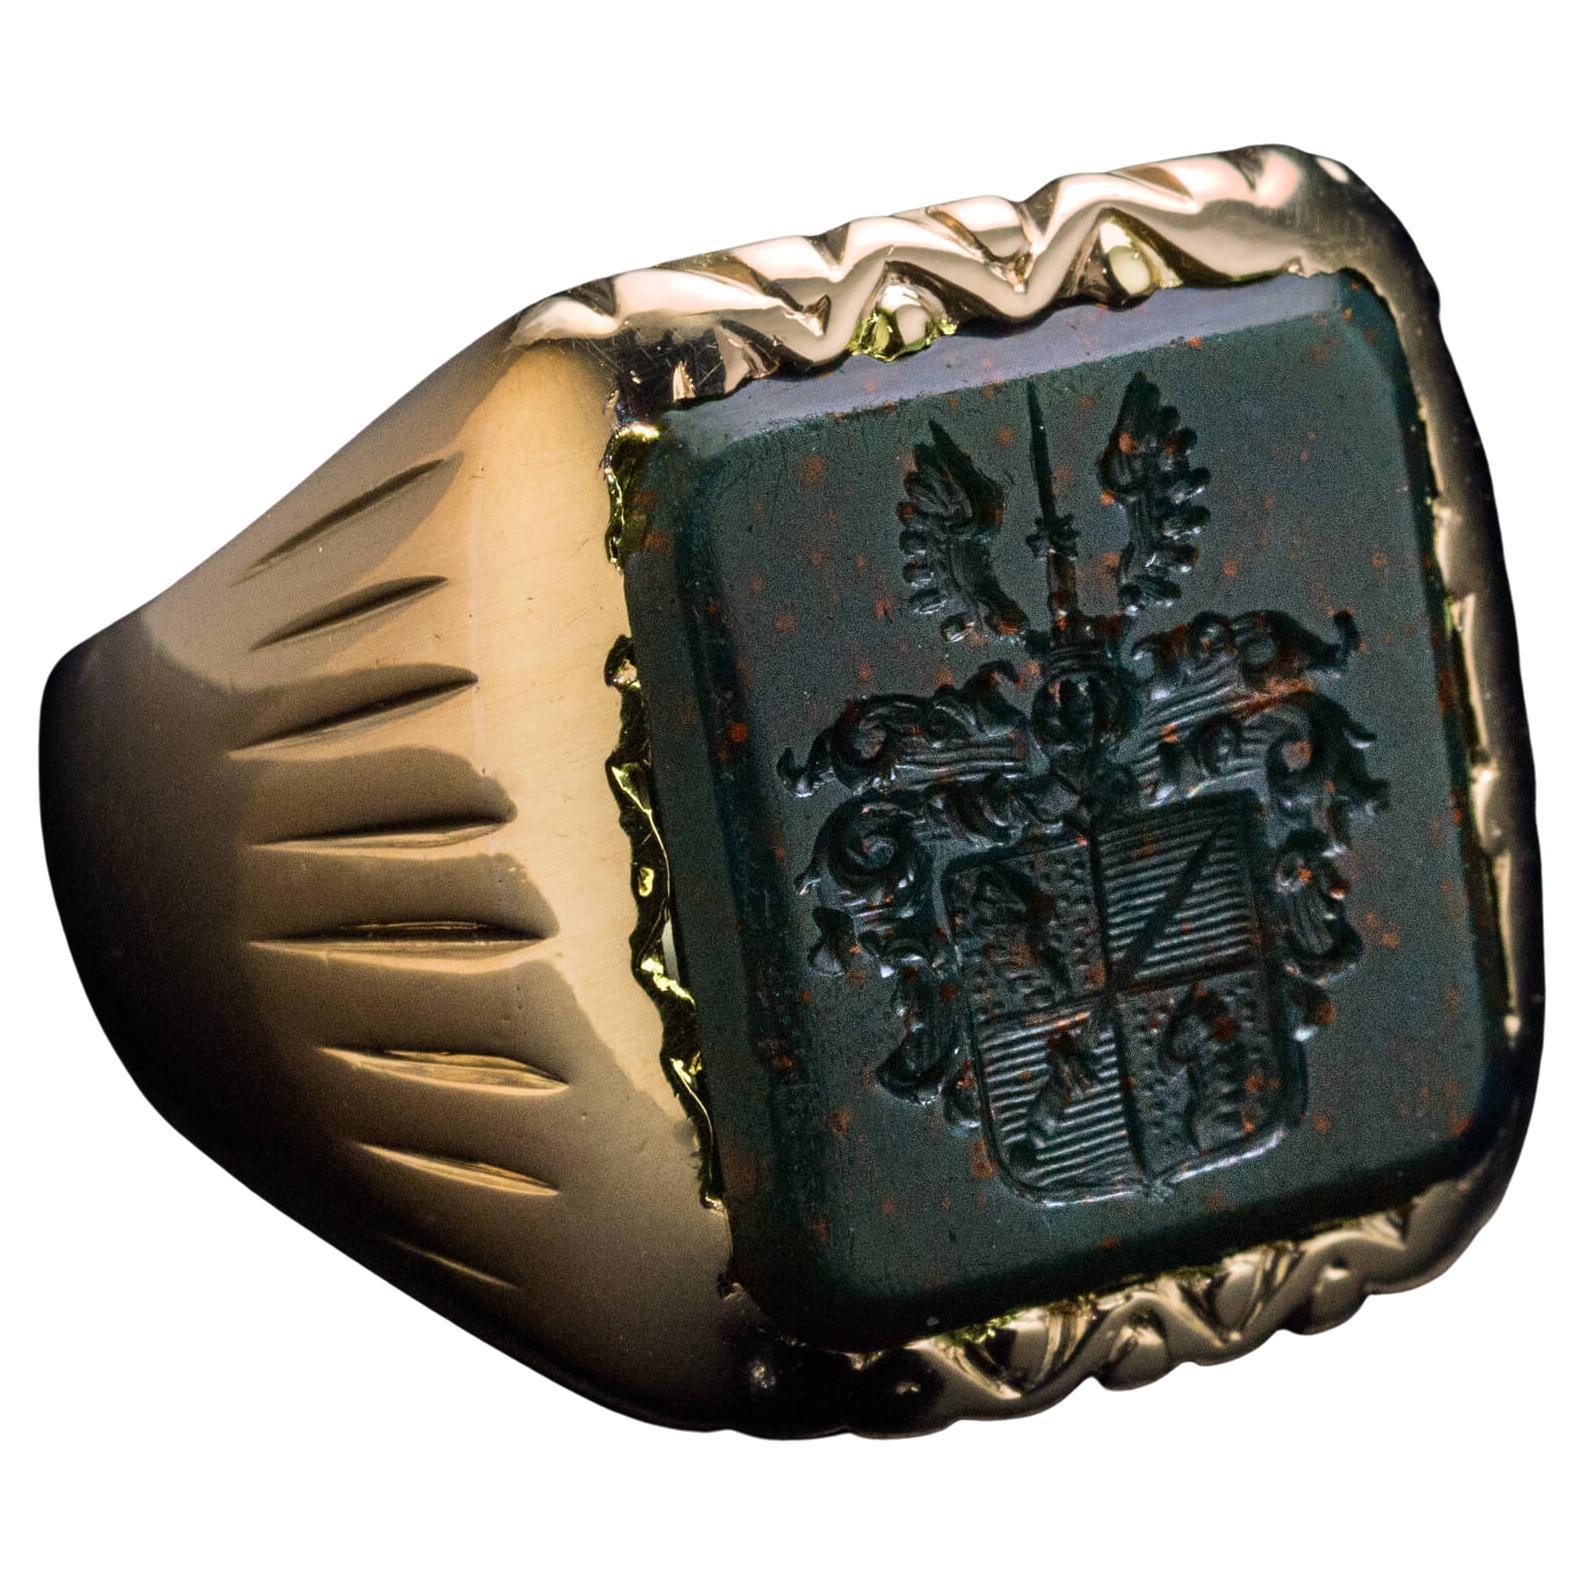 What does wearing a signet ring mean?